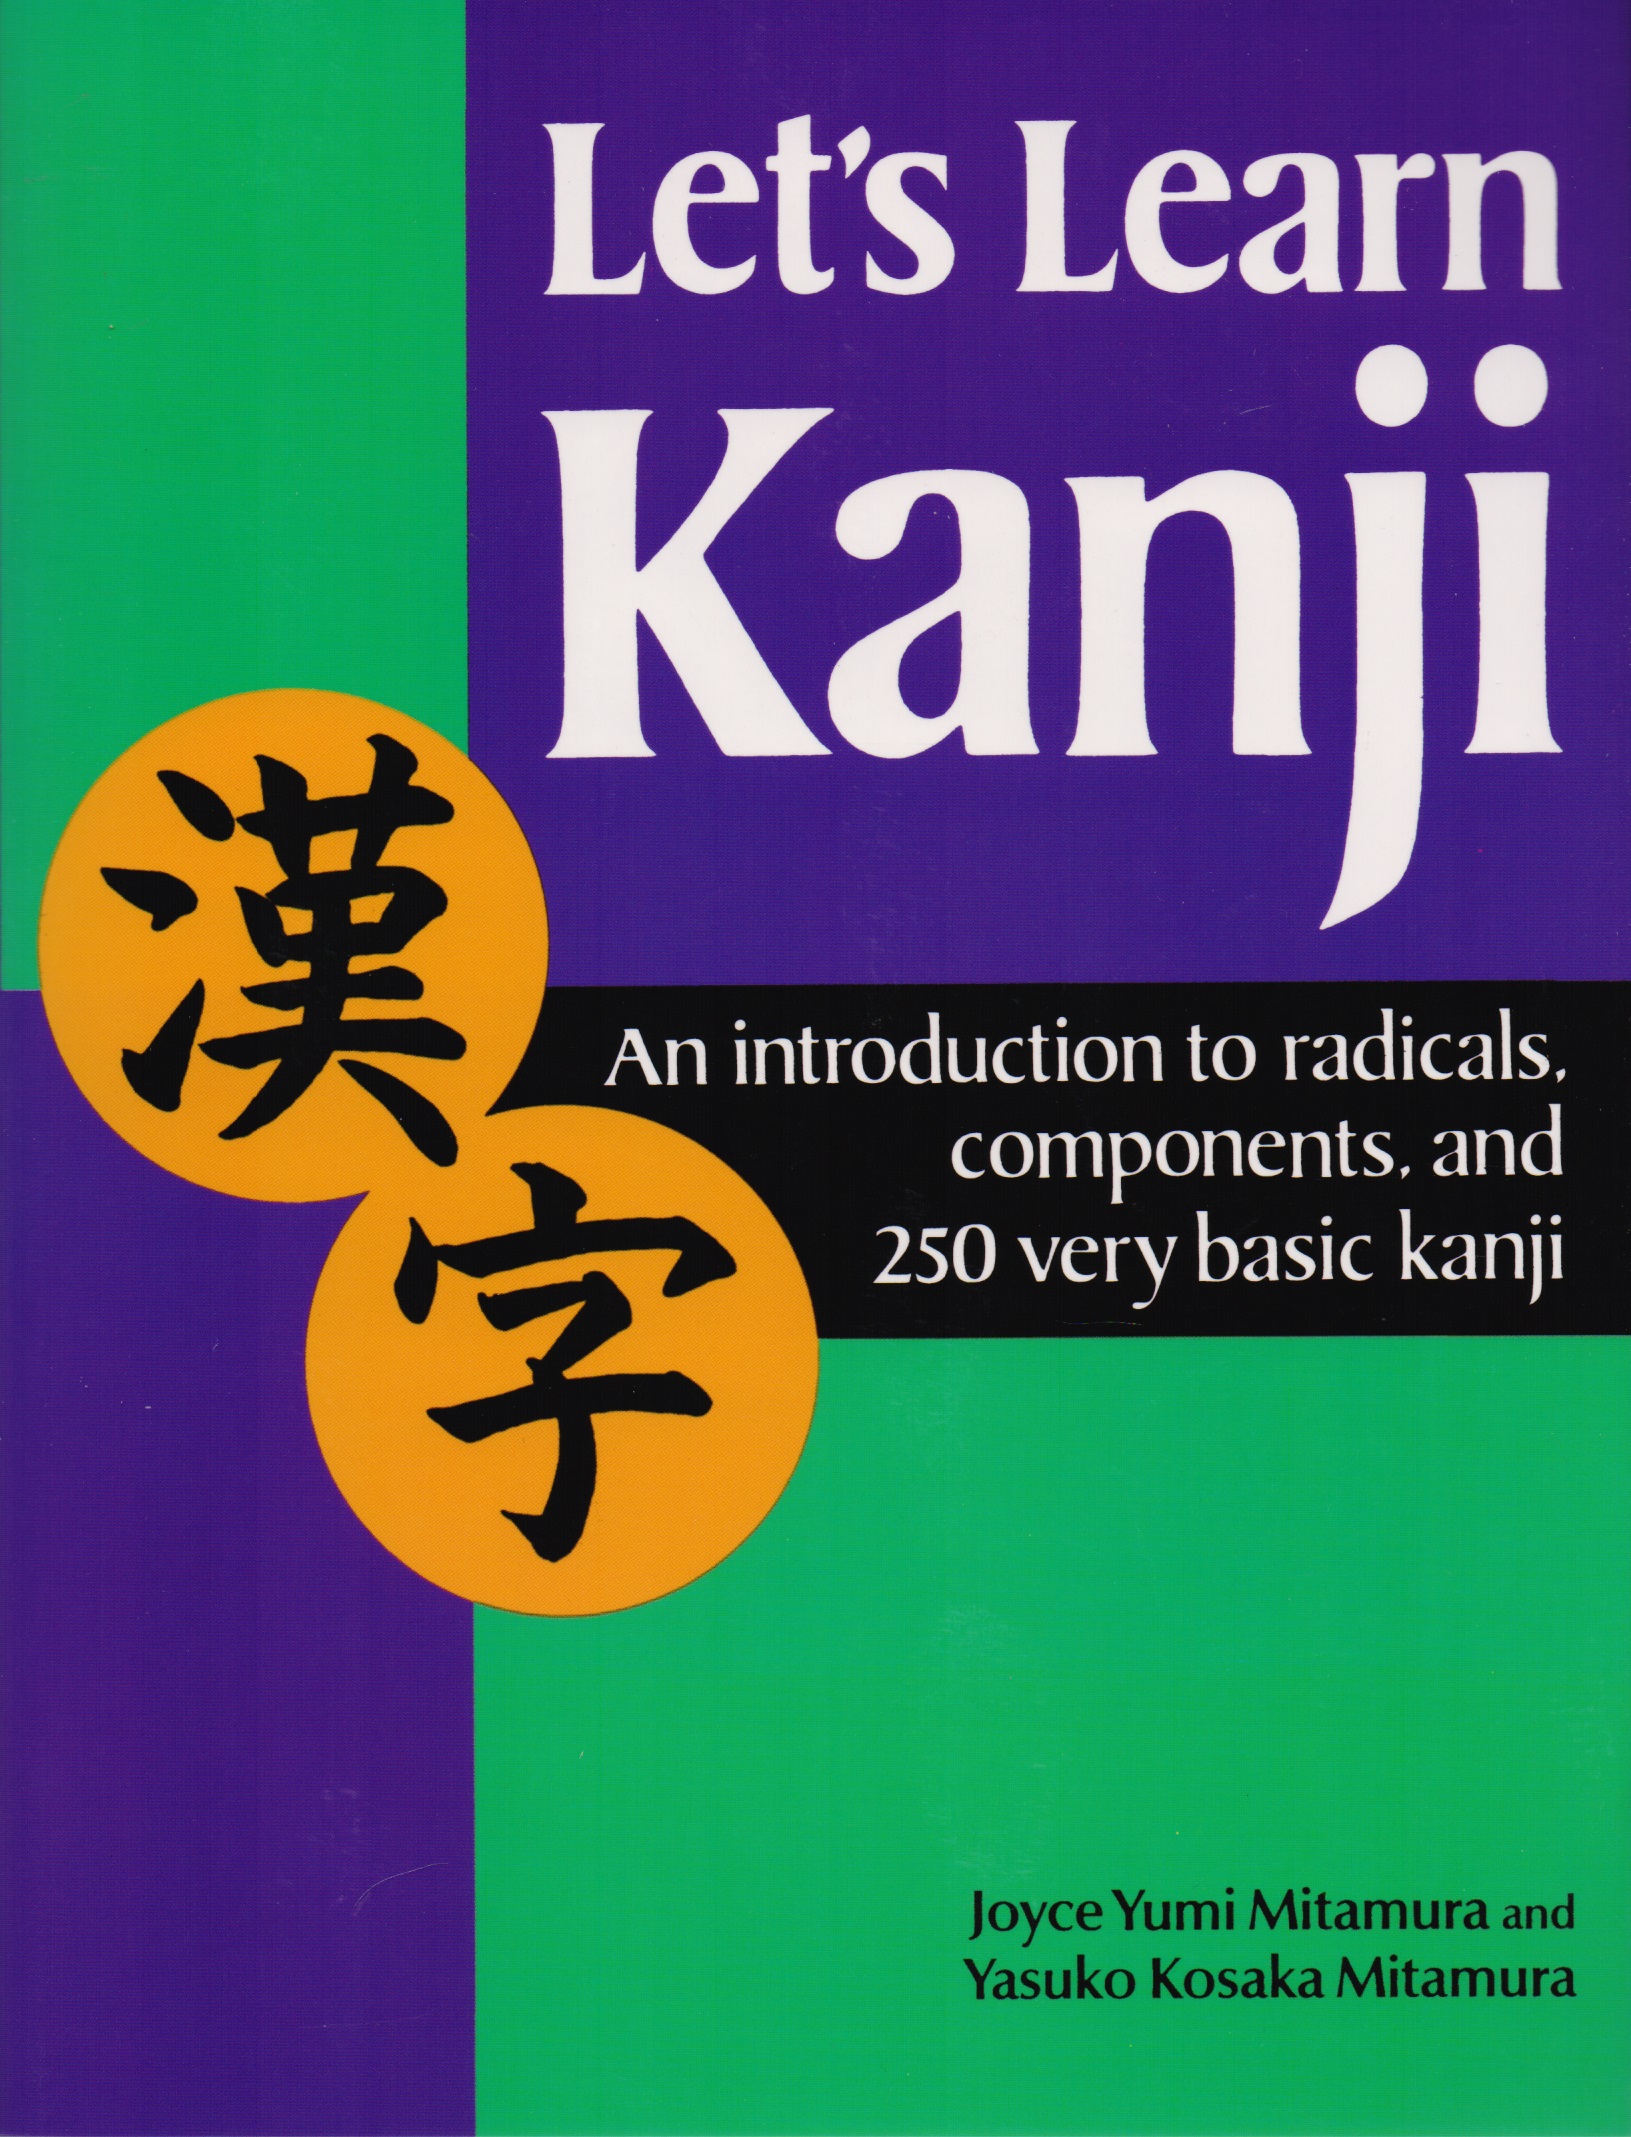 Lets Learn Kanji: An Introduction to Radicals, Components and 250 Very Basic Kanji  japanese learning learn standard japanese books with cd self learning zero based sino japanese basic tutorial book sticker livre